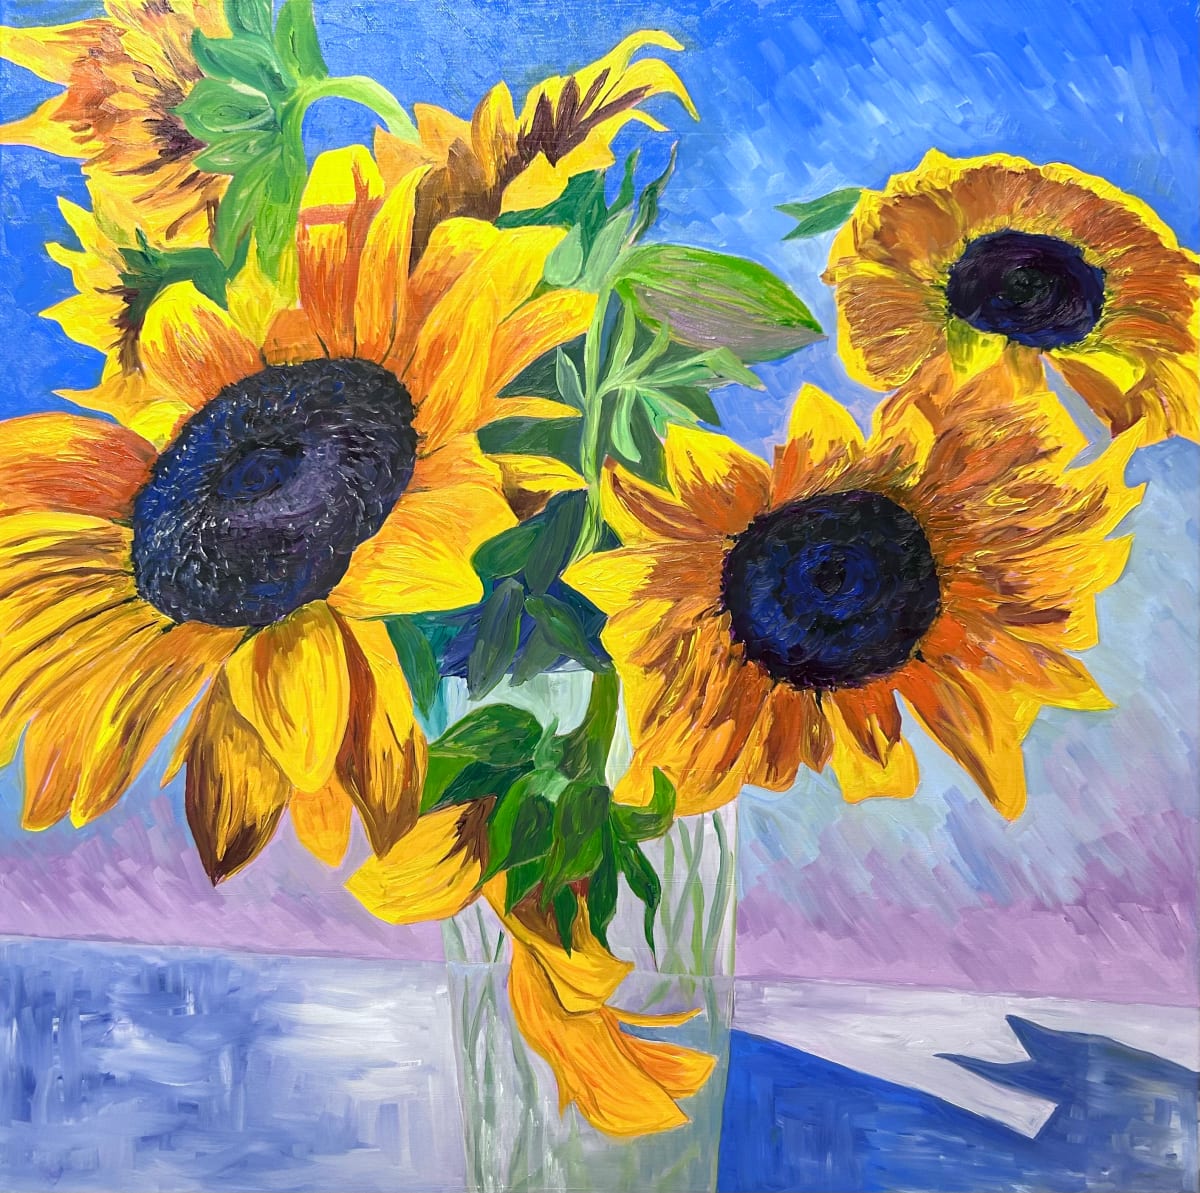 “Sunflowers in a Vase” by Barbara Ryan 